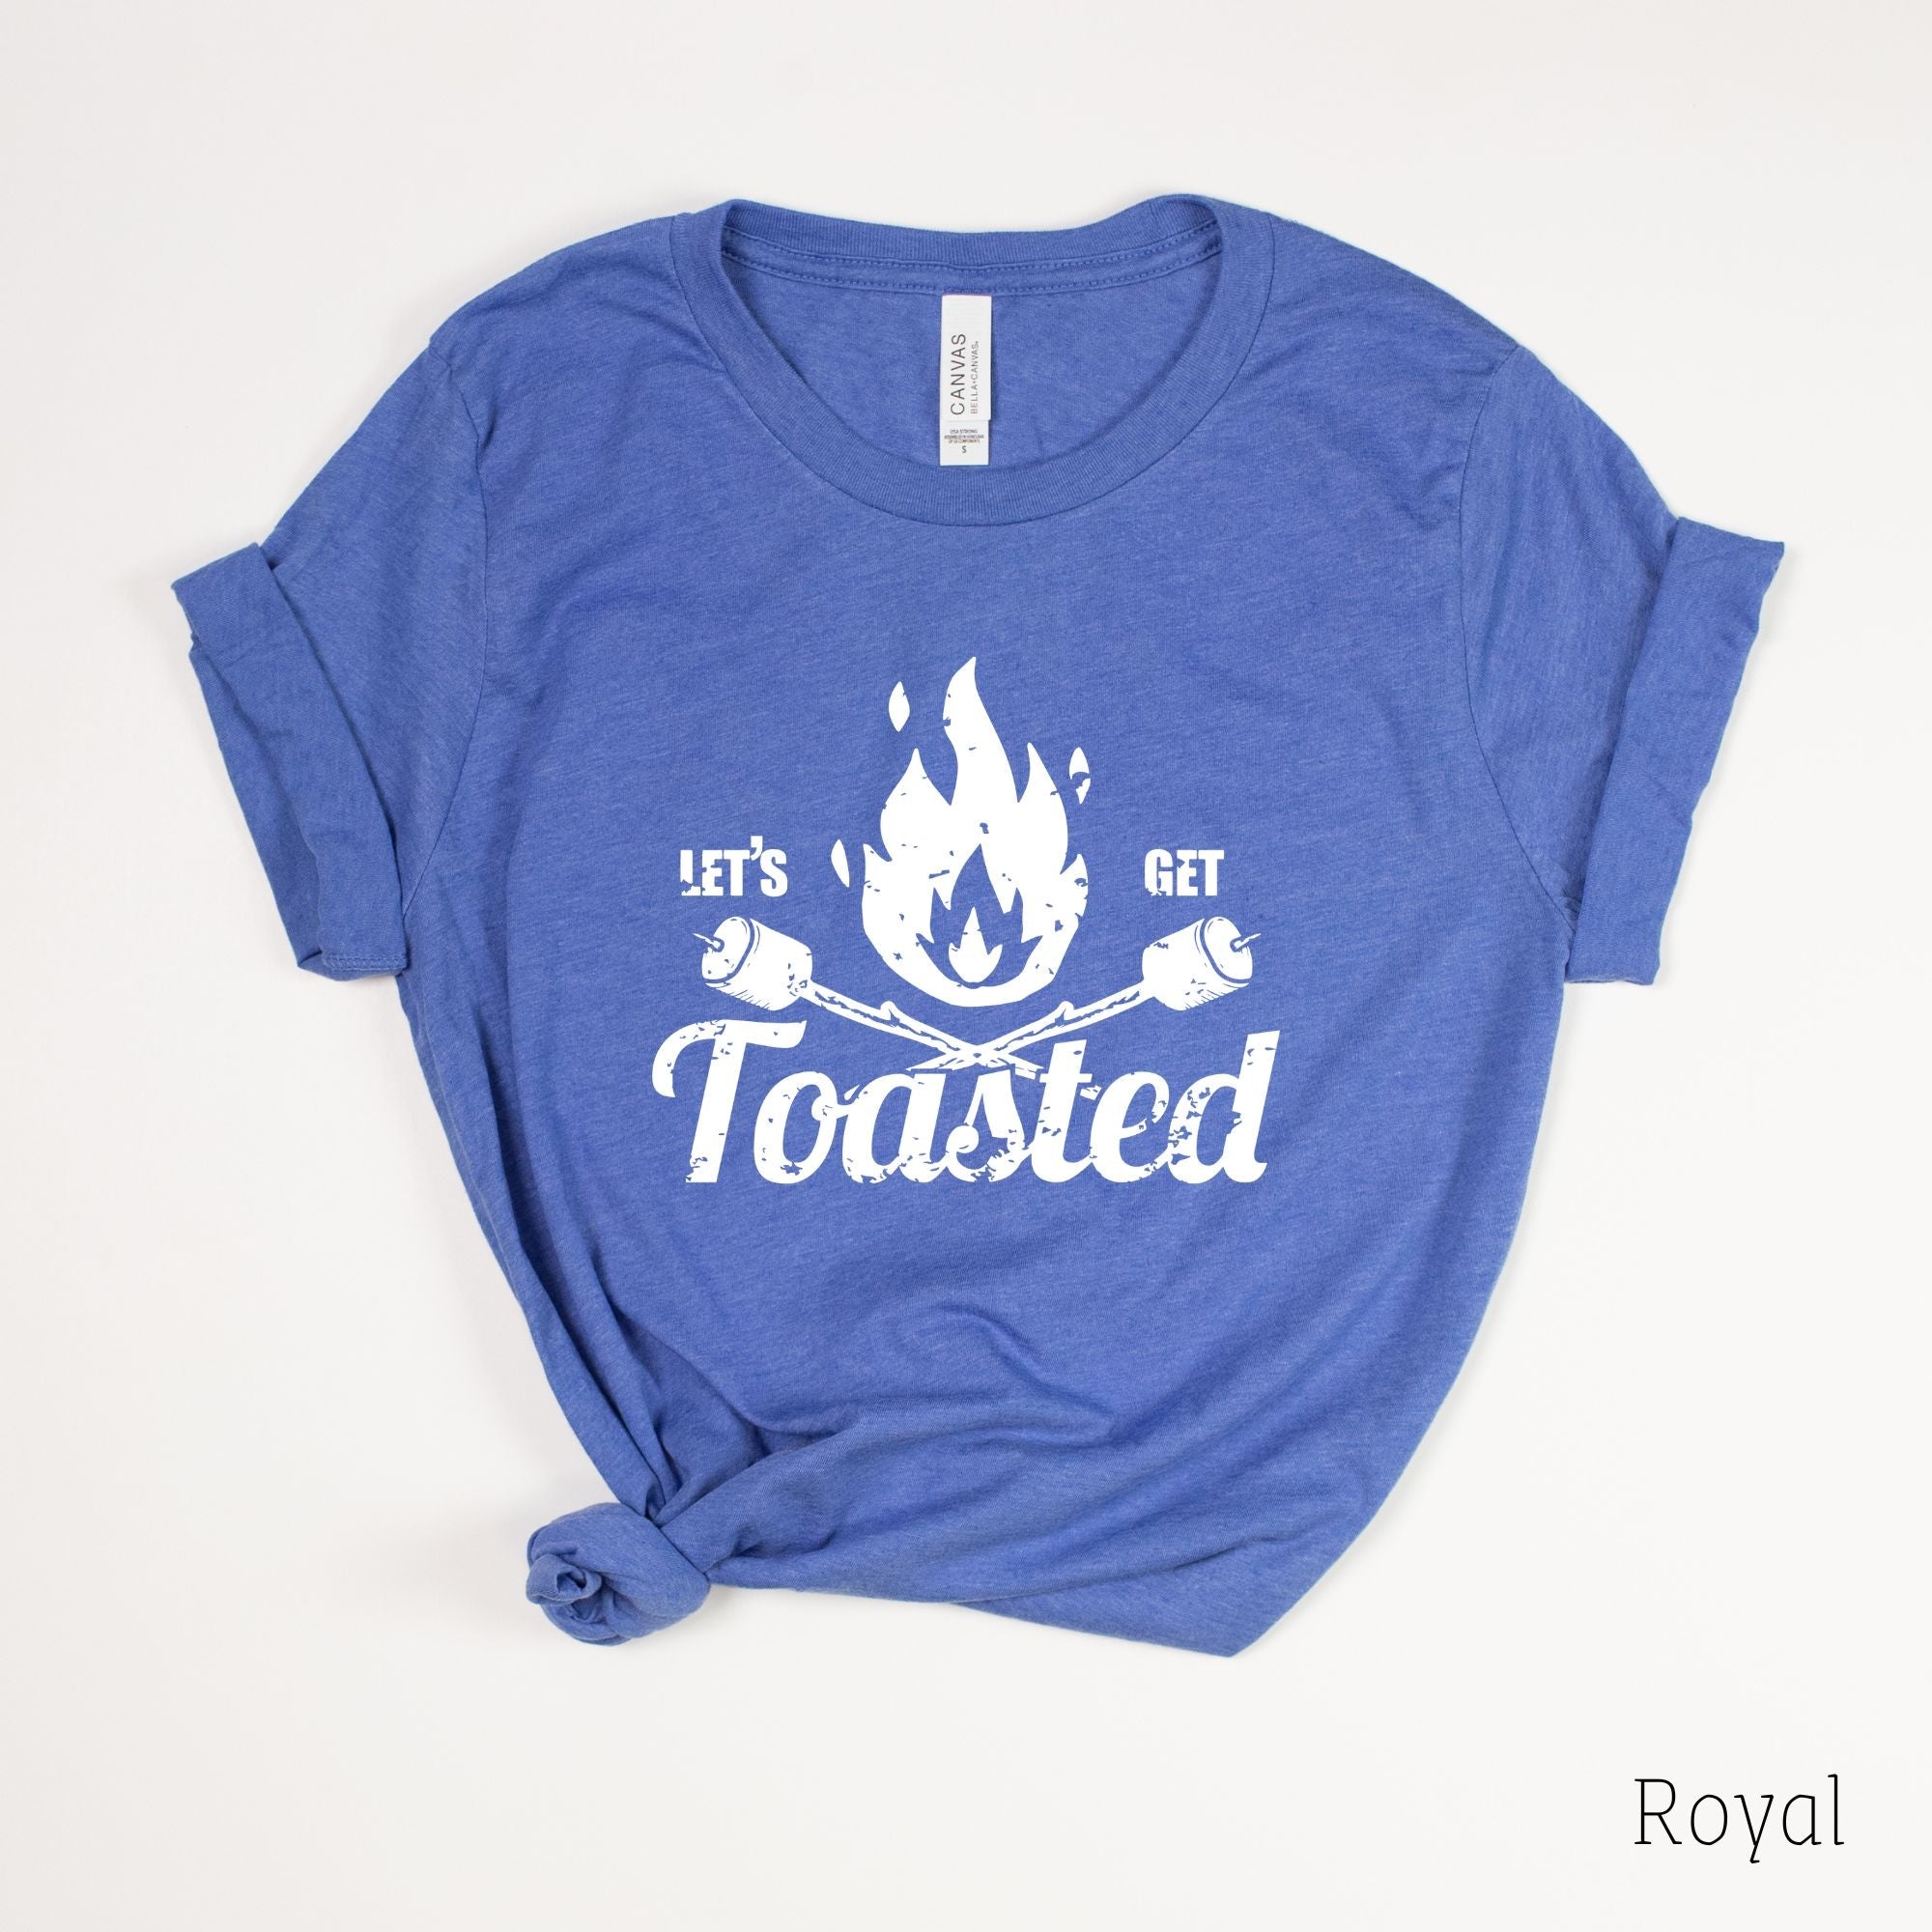 Funny Let's Get Toasted TShirt *UNISEX FIT*-208 Tees Wholesale, Idaho